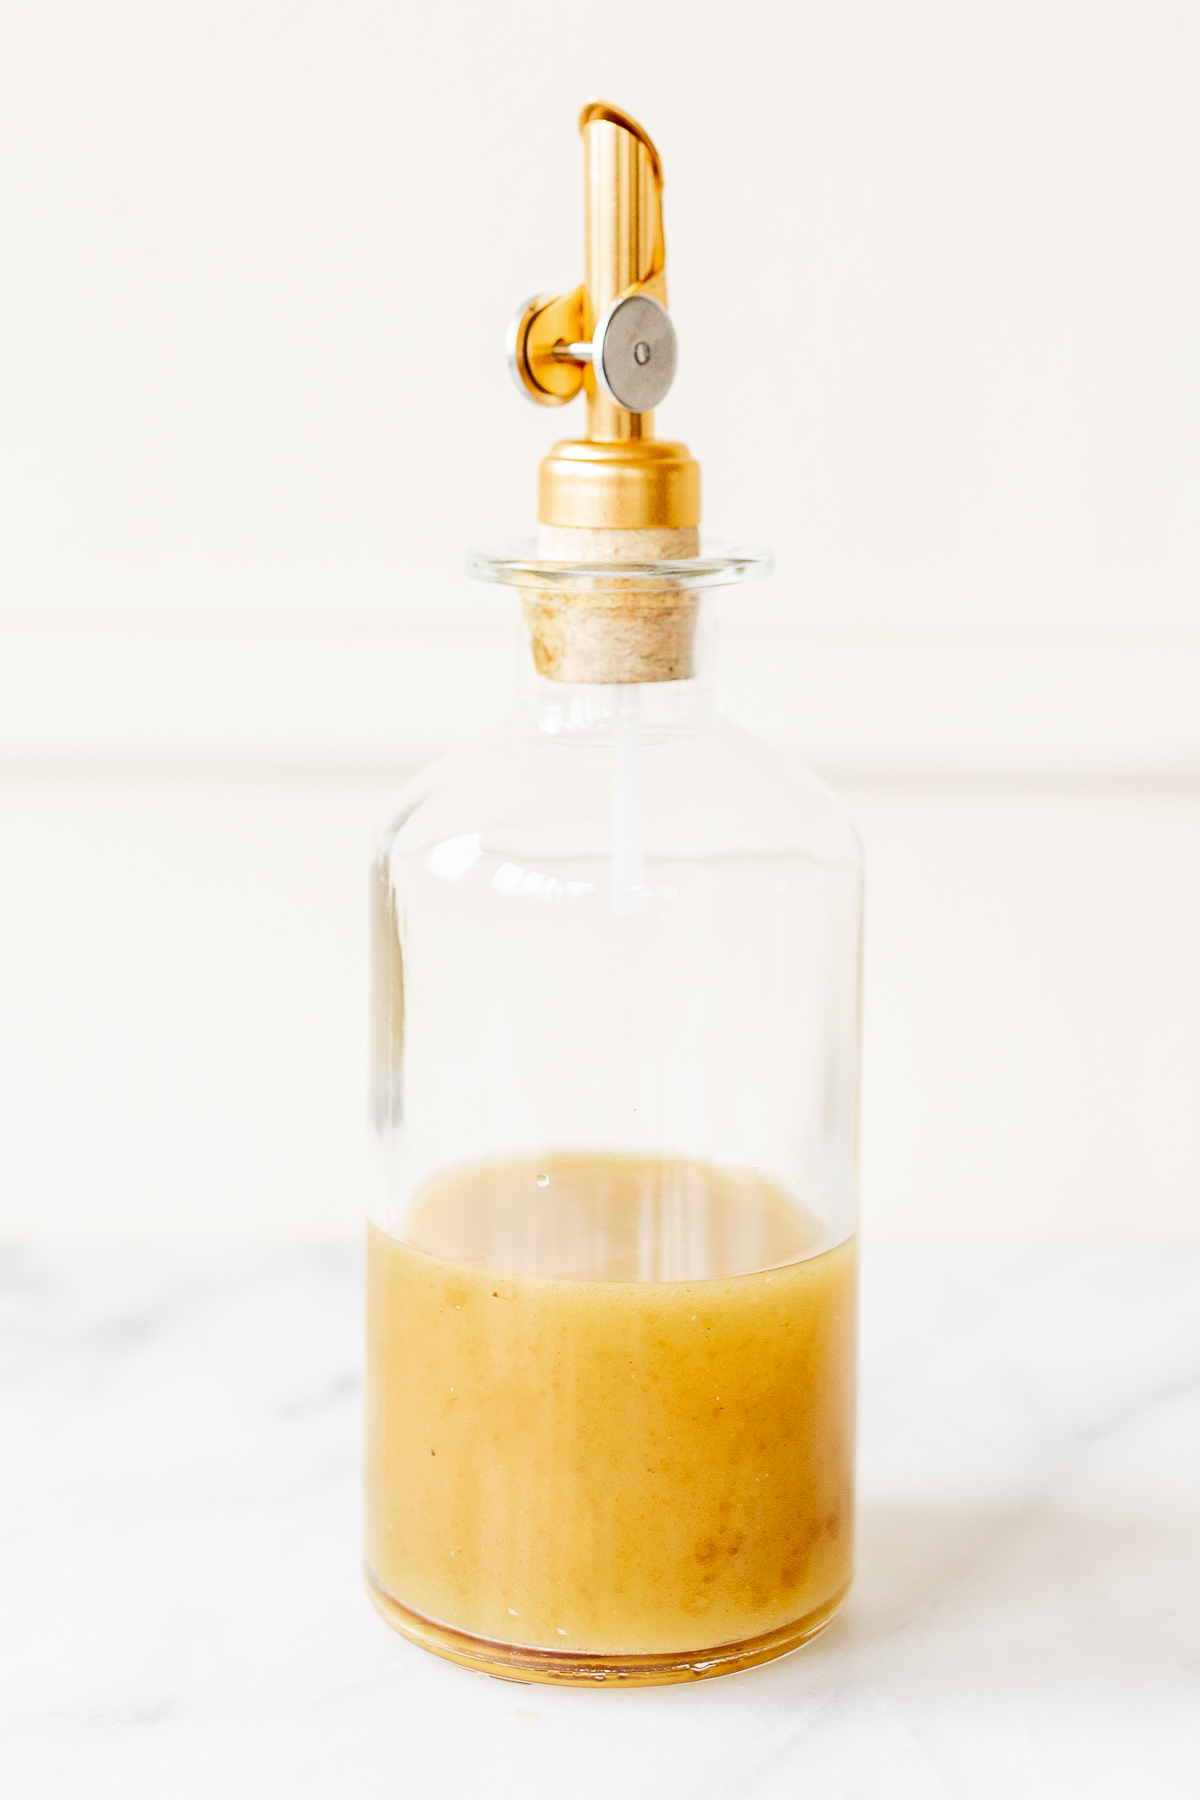 A glass bottle with a gold stopper on a marble countertop, filled with sherry vinaigrette.